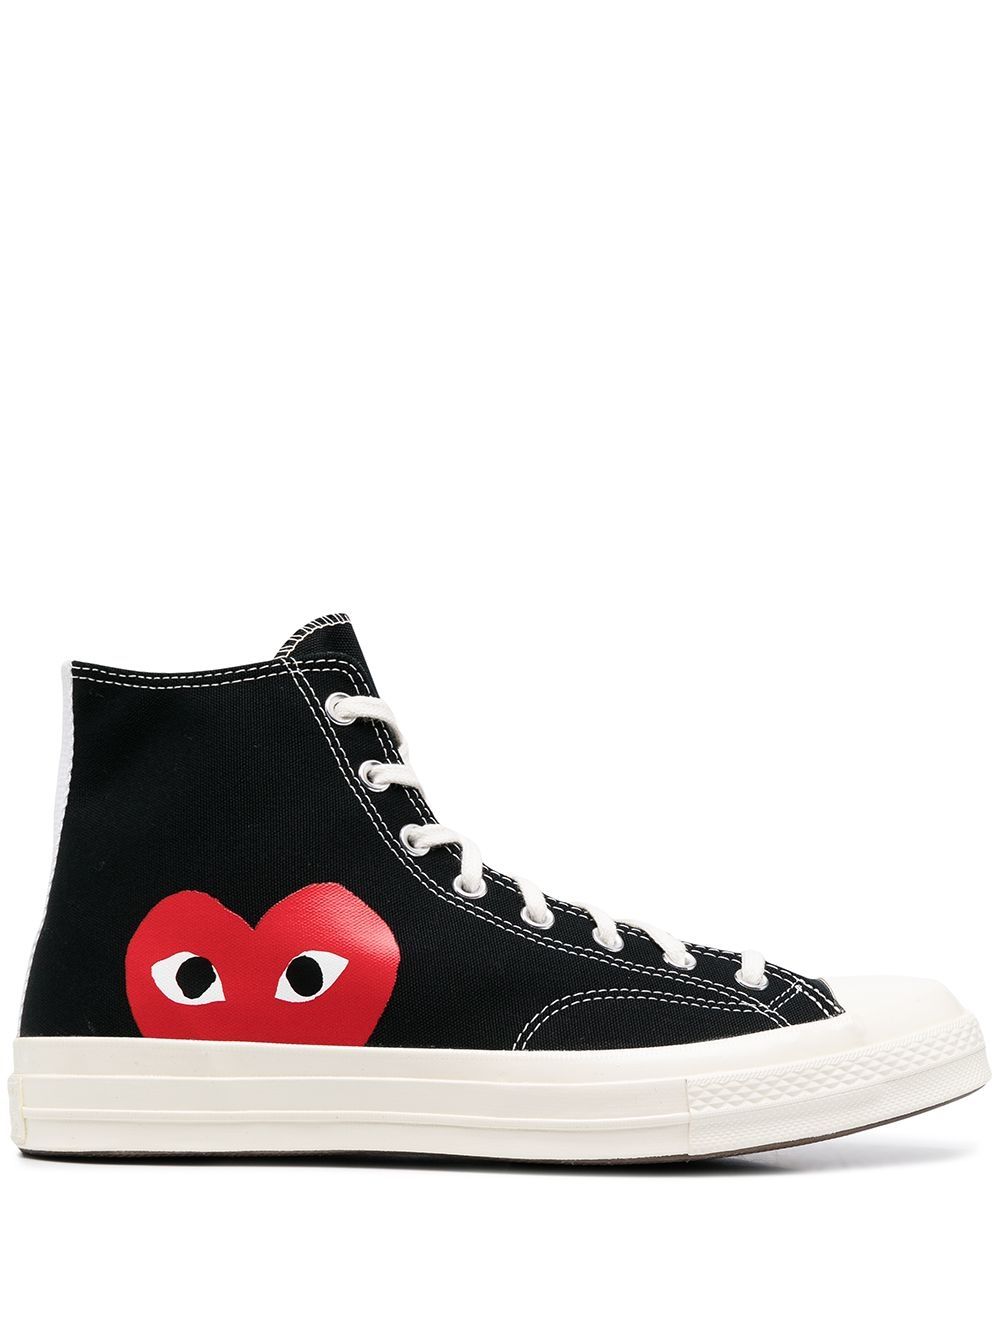 Sneakers alte in canvas x Converse nere/rosse/bianche